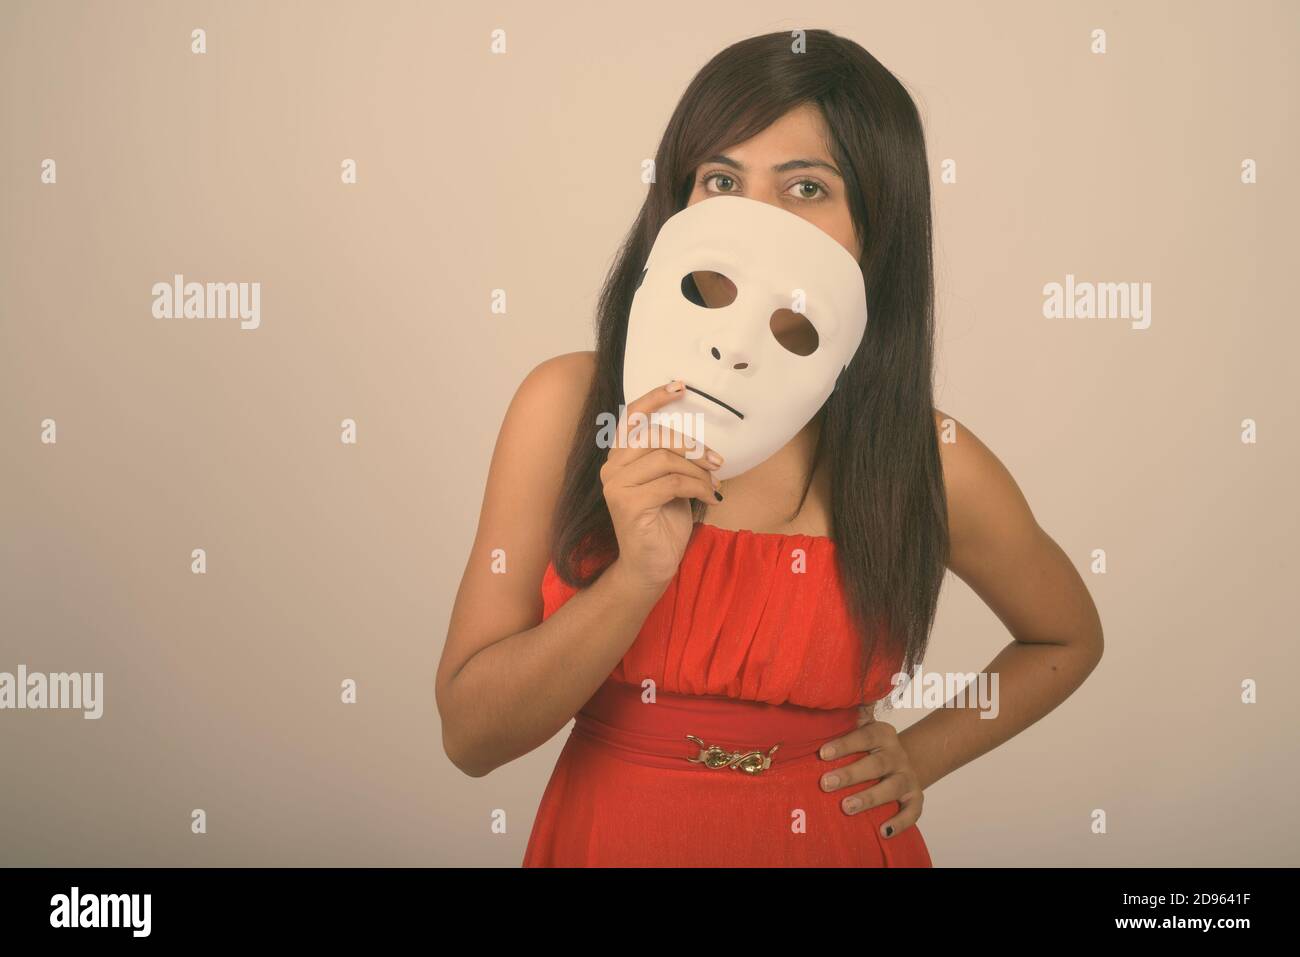 Studio shot of young Persian woman covering face with white mask against gray background Stock Photo